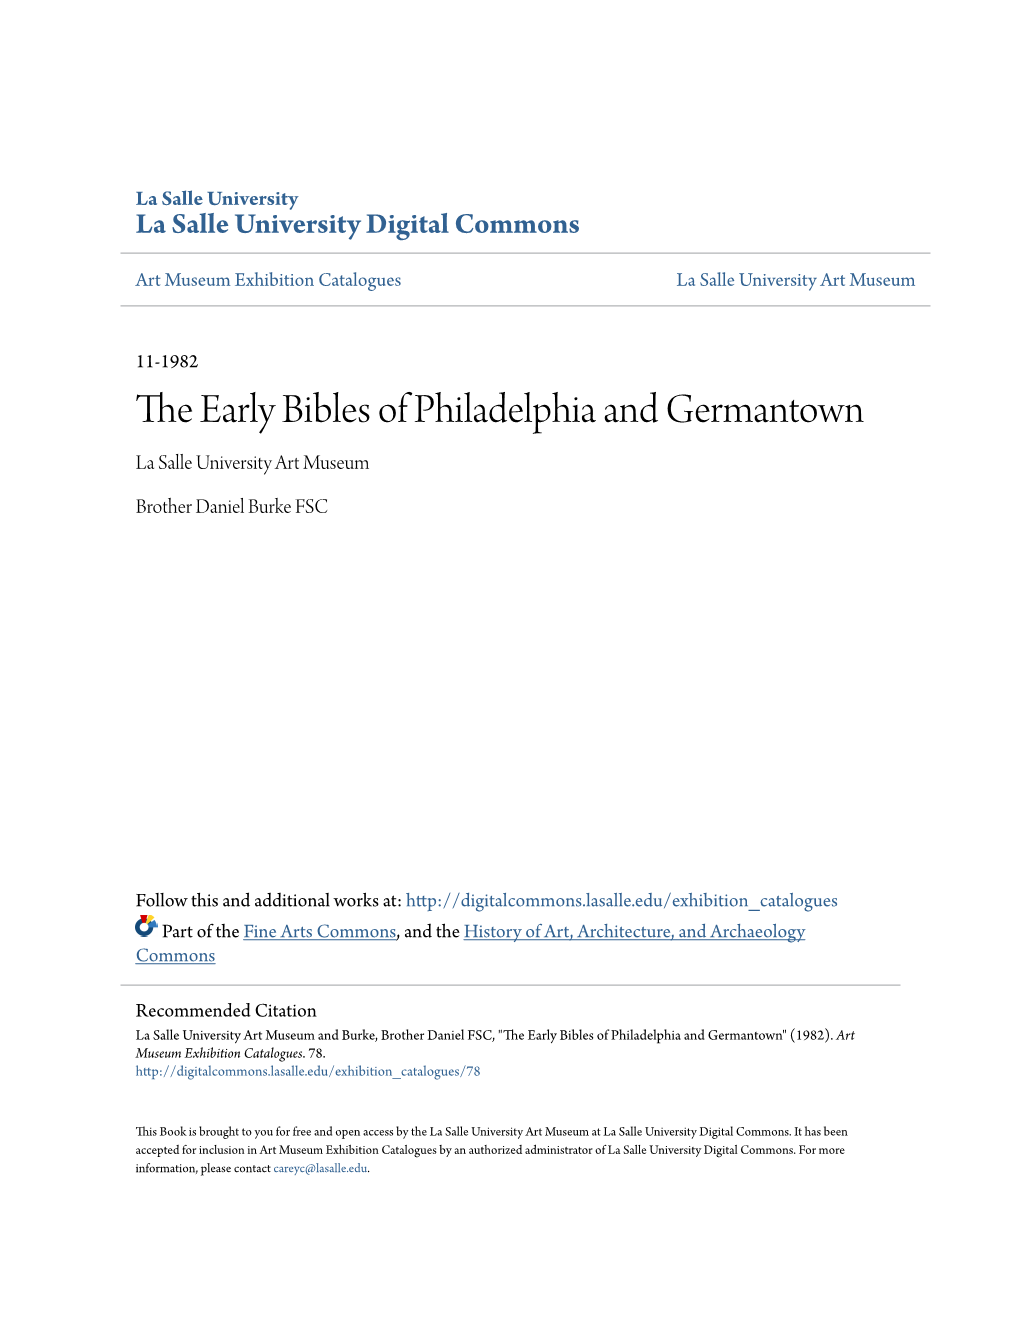 The Early Bibles of Philadelphia and Germantown" (1982)